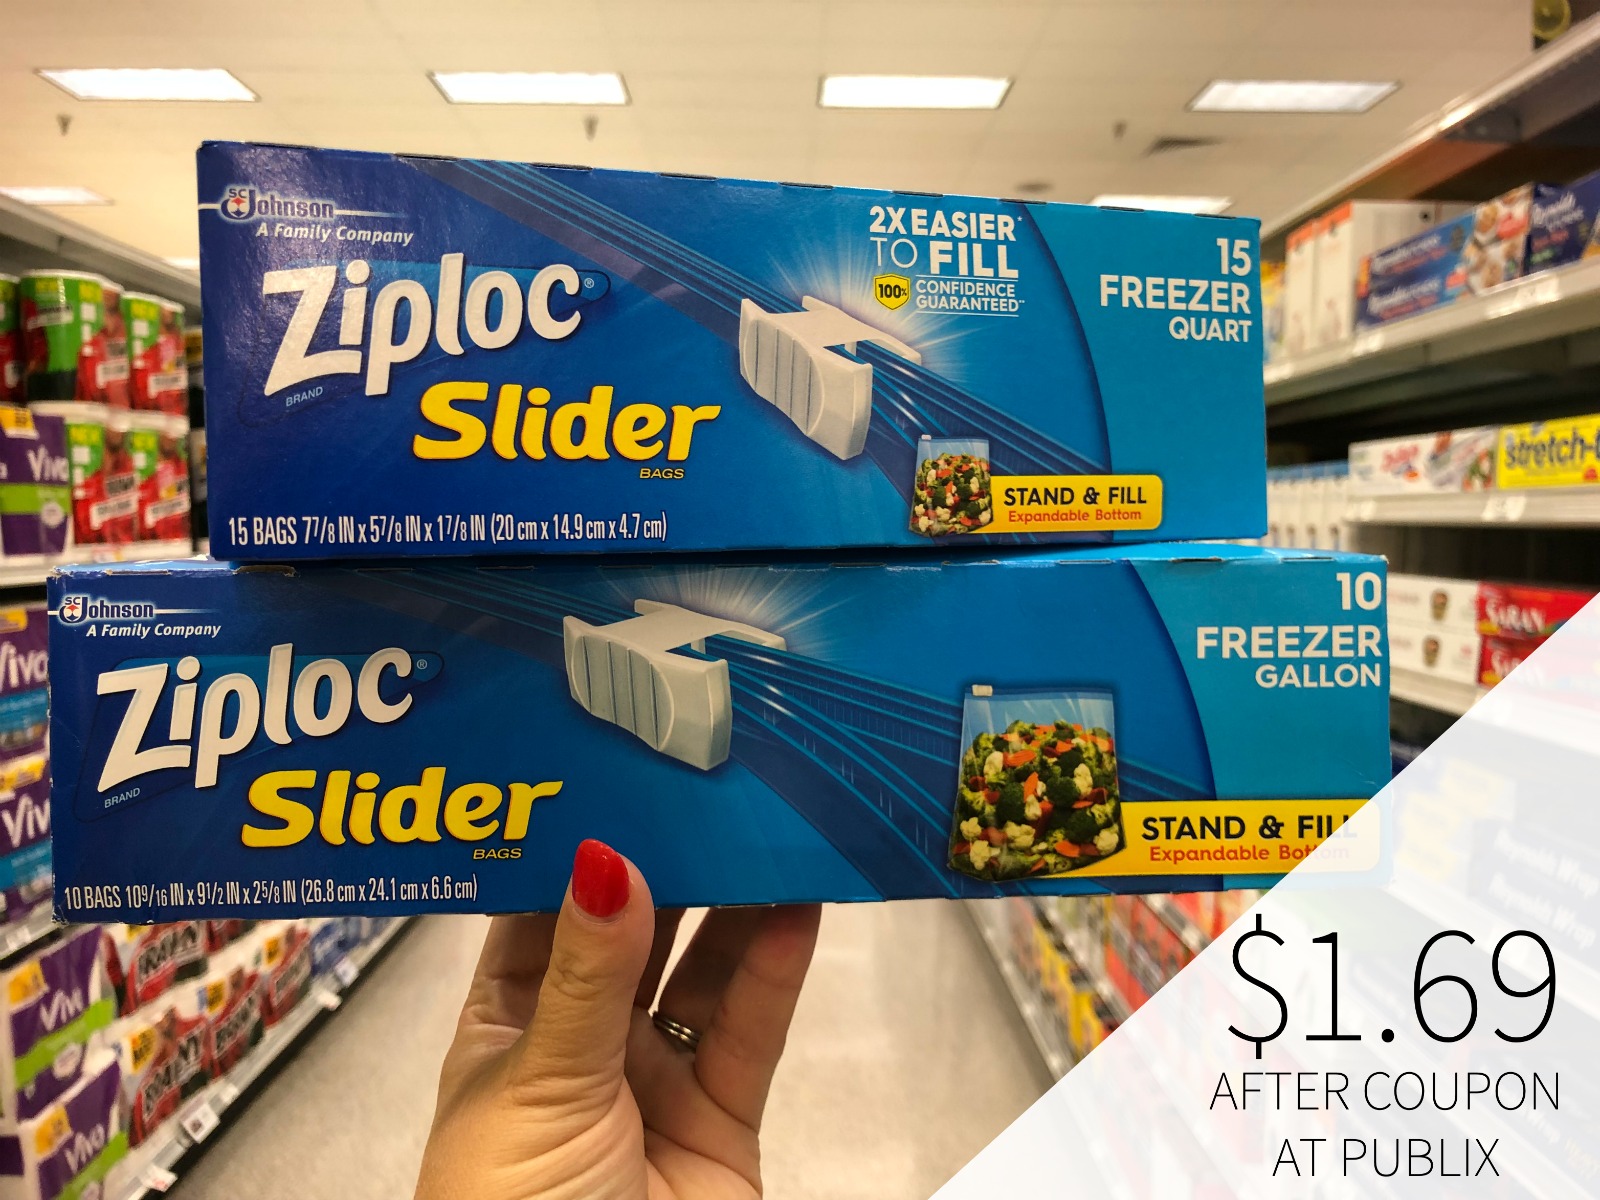 Keep Your Weekly Budget Low With The Help Of Ziploc® Brand Bags & Containers - Save Now At Publix on I Heart Publix